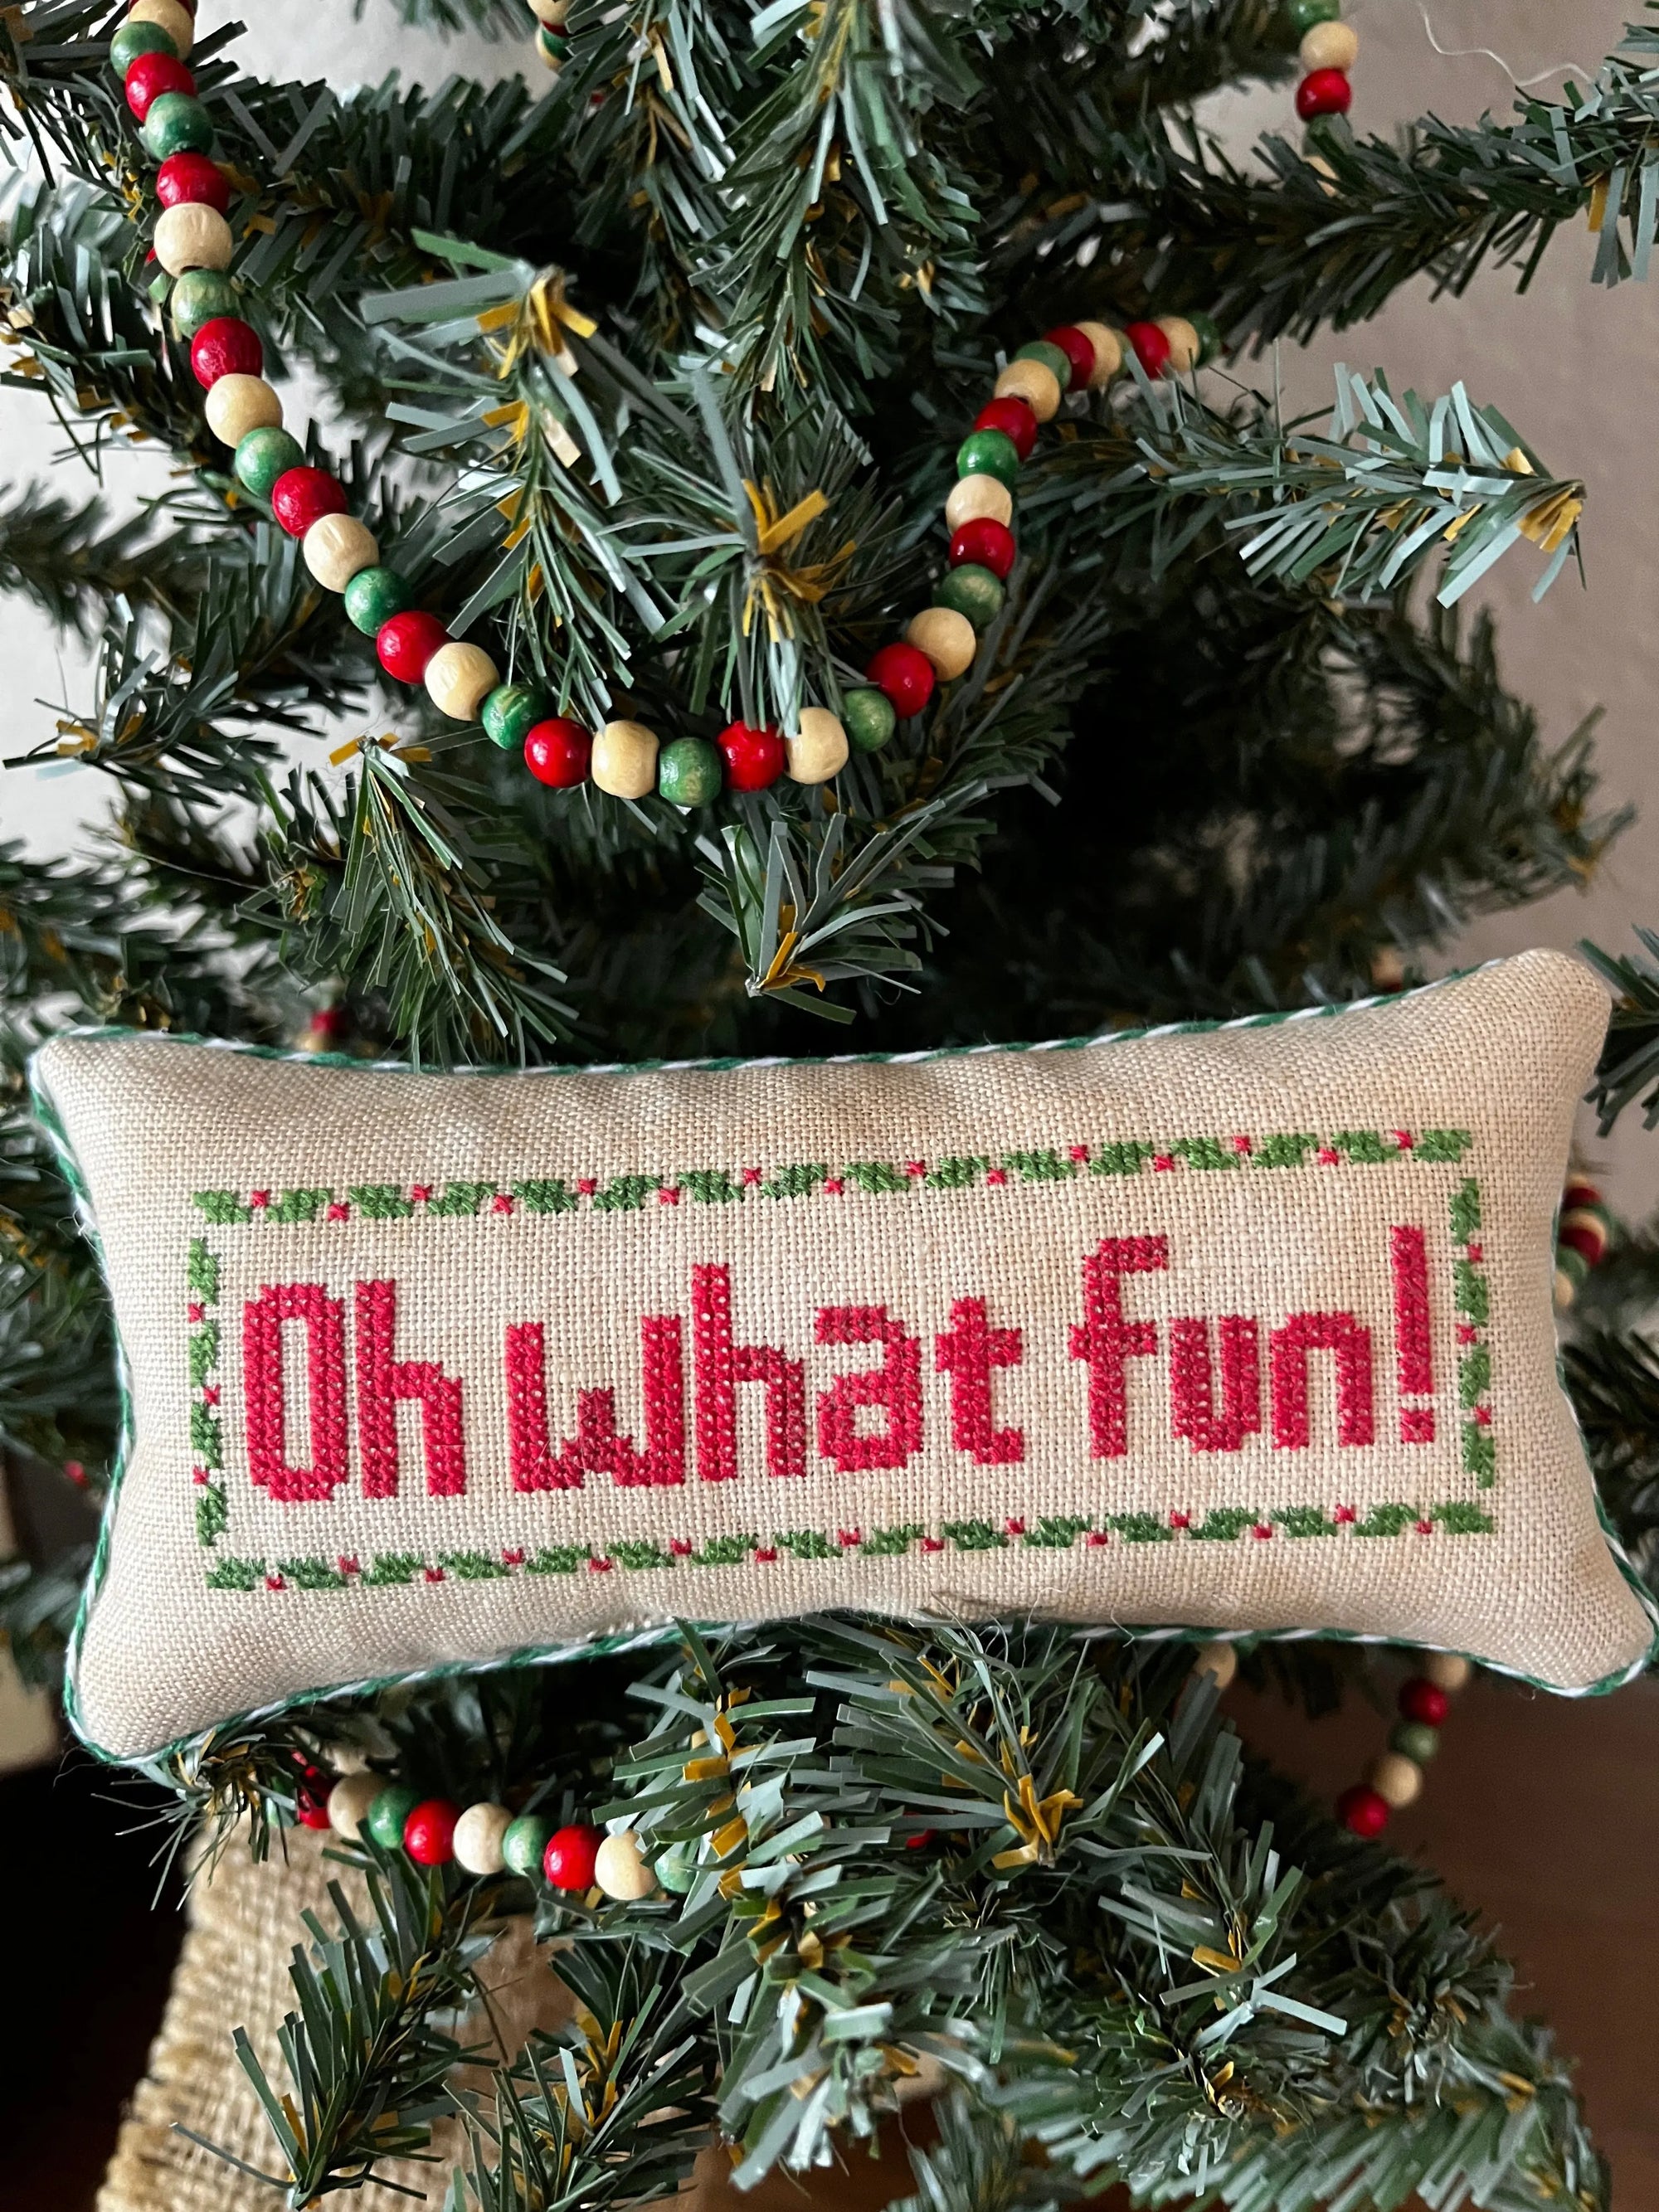 Christmas: Oh What Fun! by Colorado Cross Stitcher Colorado Cross Stitcher